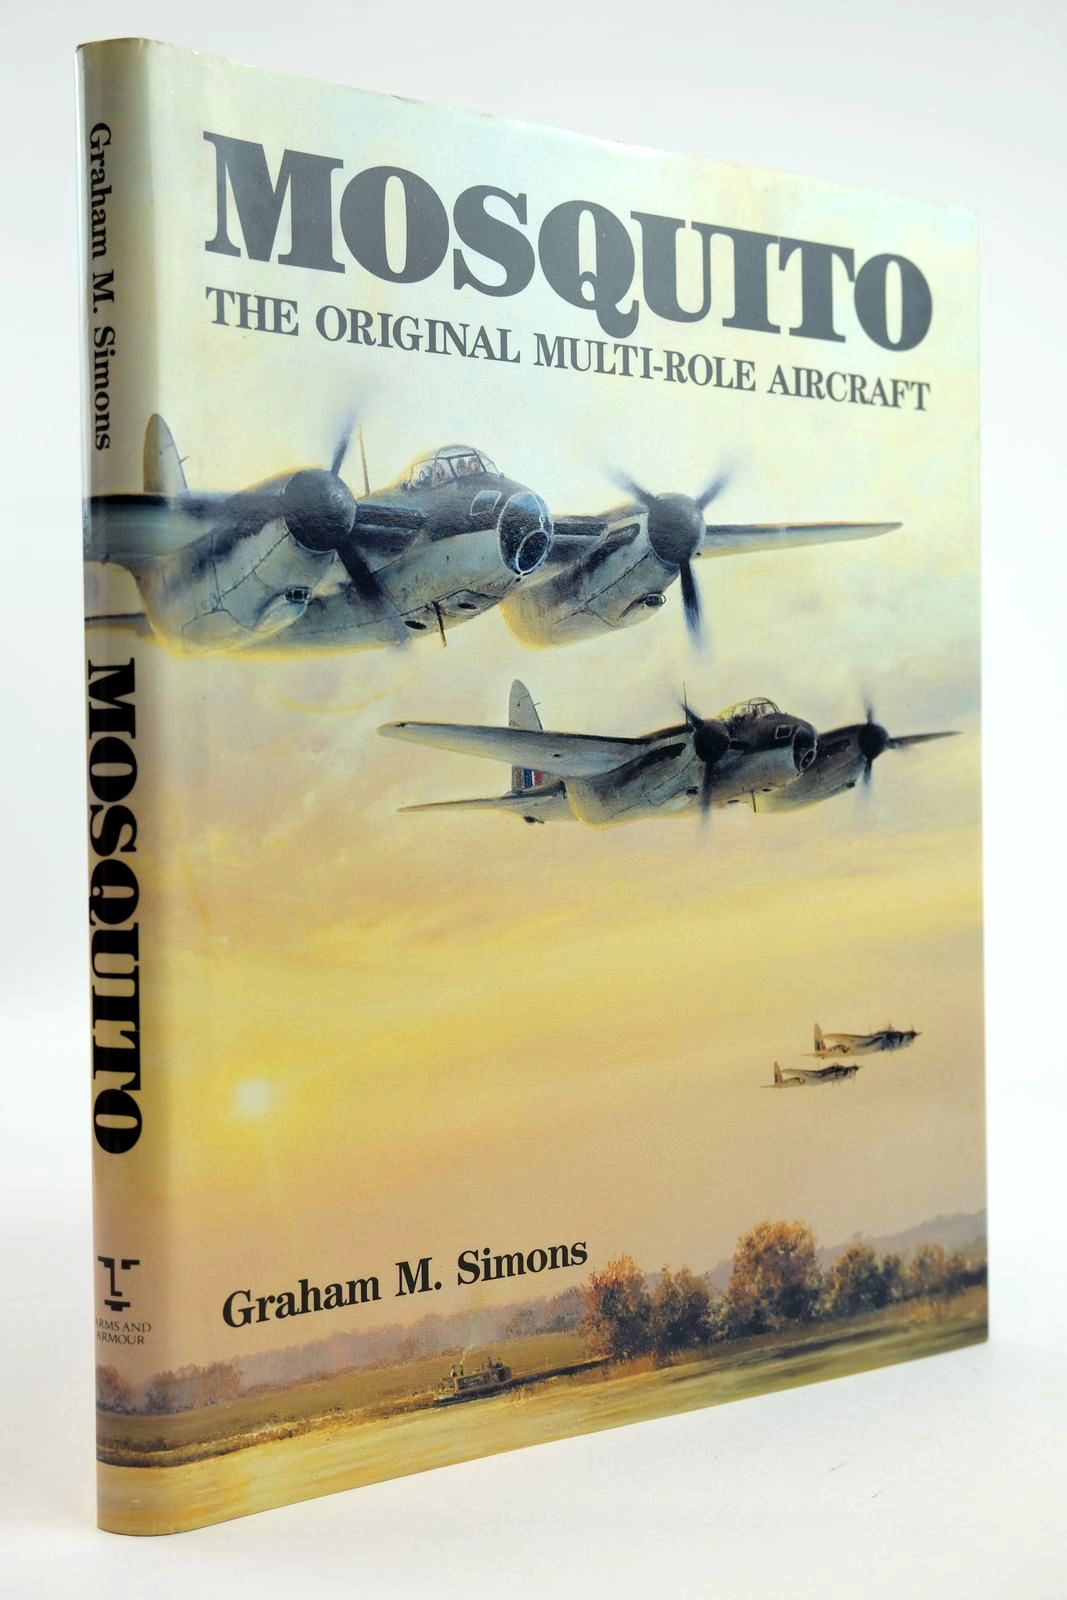 Photo of MOSQUITO THE ORIGINAL MULTI-ROLE AIRCRAFT written by Simons, Graham M. published by Arms & Armour Press (STOCK CODE: 2132161)  for sale by Stella & Rose's Books